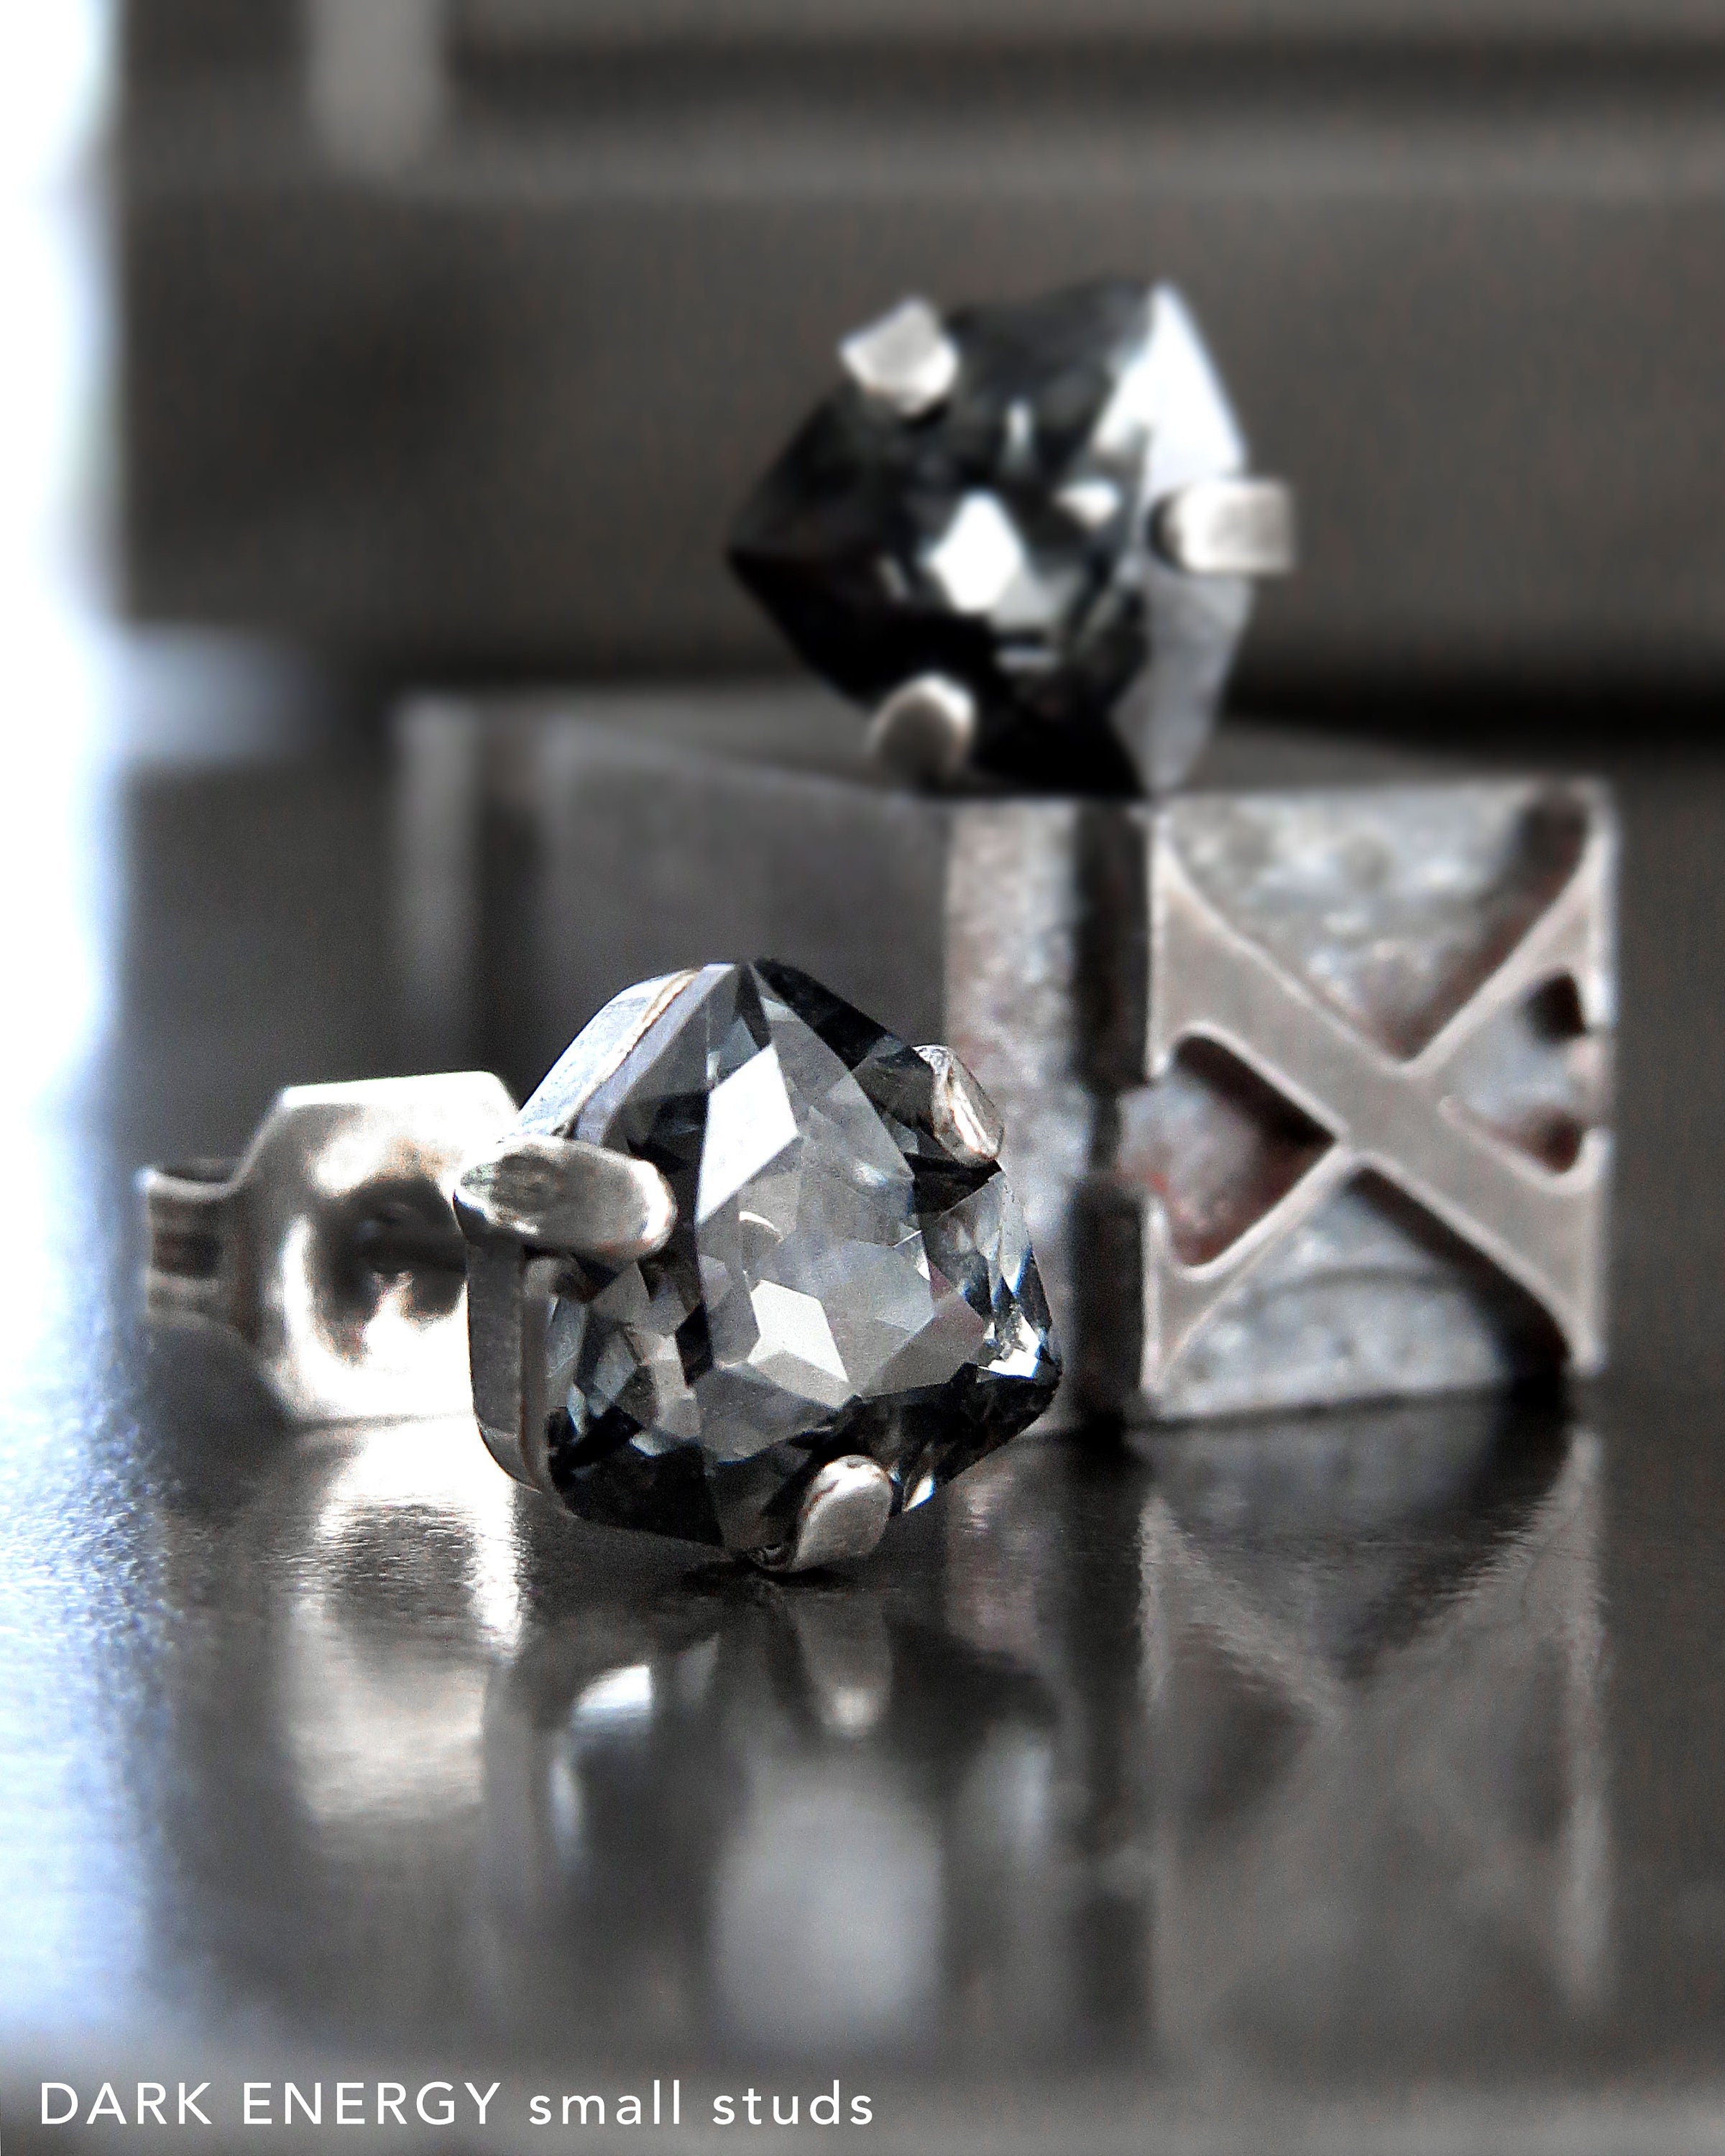 DARK ENERGY - Large Black Trilliant Crystal Stud Earrings, Dark Carbon Grey Triangle Crystal Post Studs, 2 Size Options: Large Small Studs